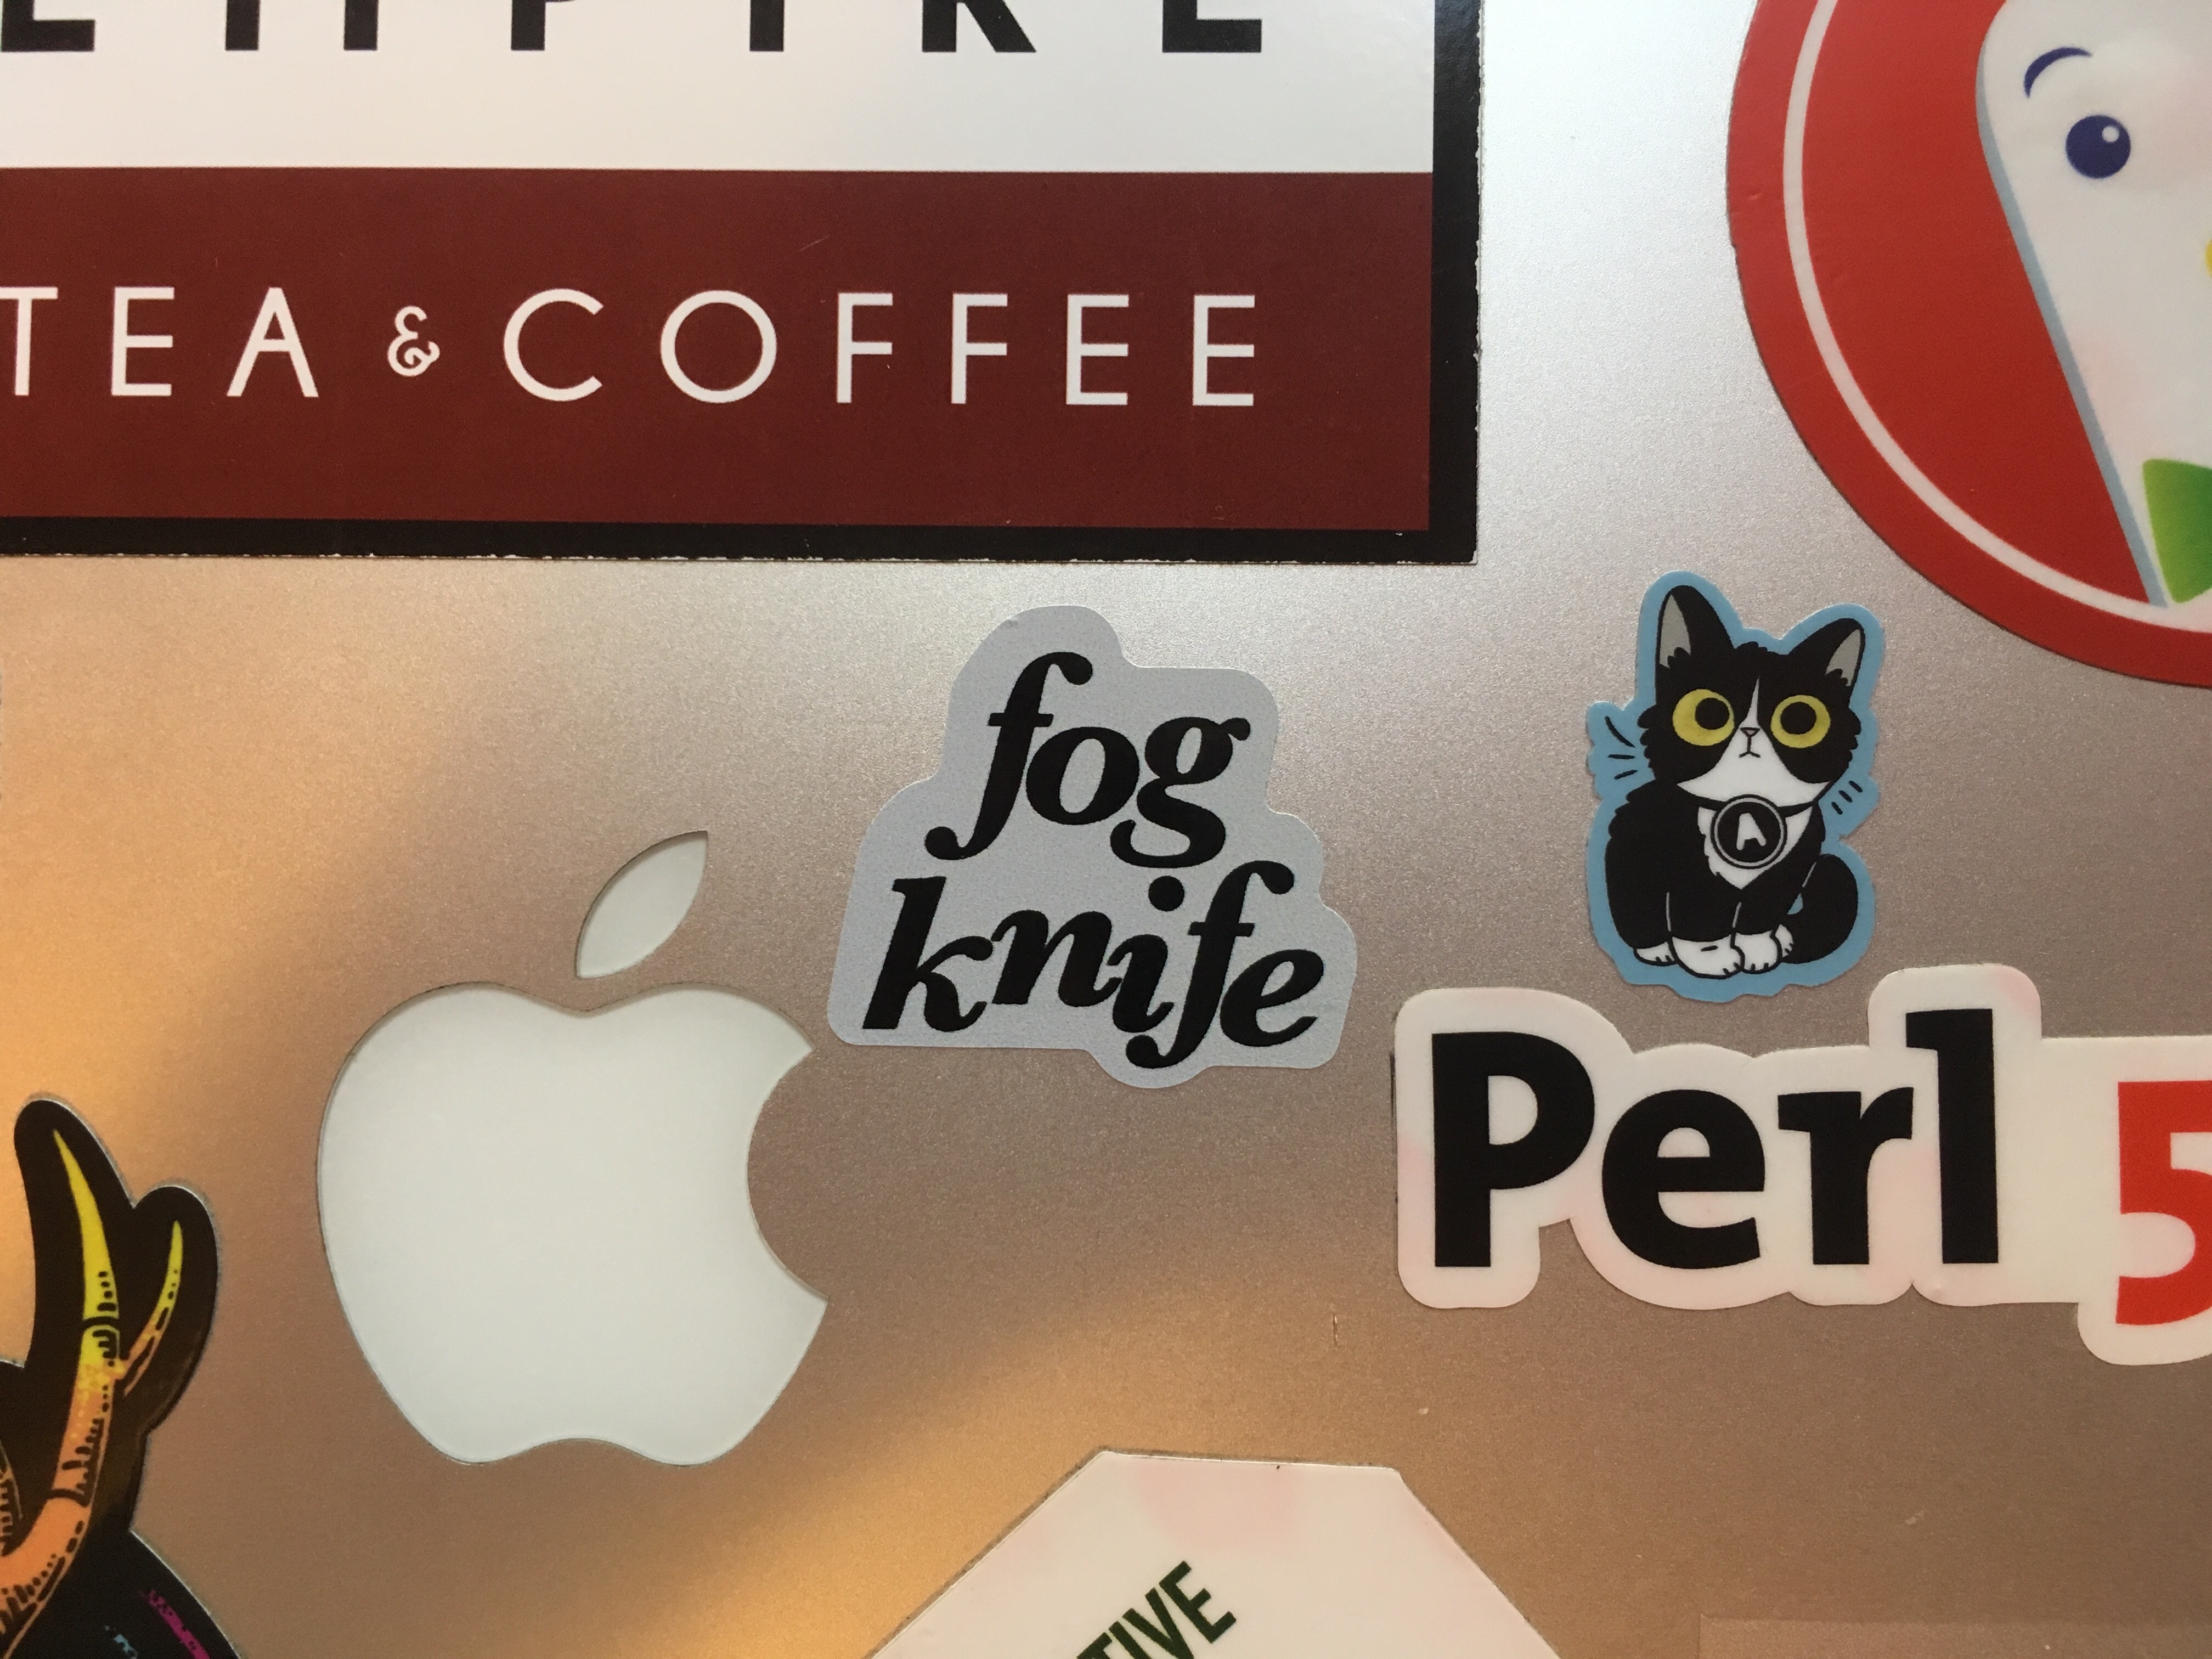 Photograph of a small sticker reading 'Fogknife', attached to a Mac laptop cover.